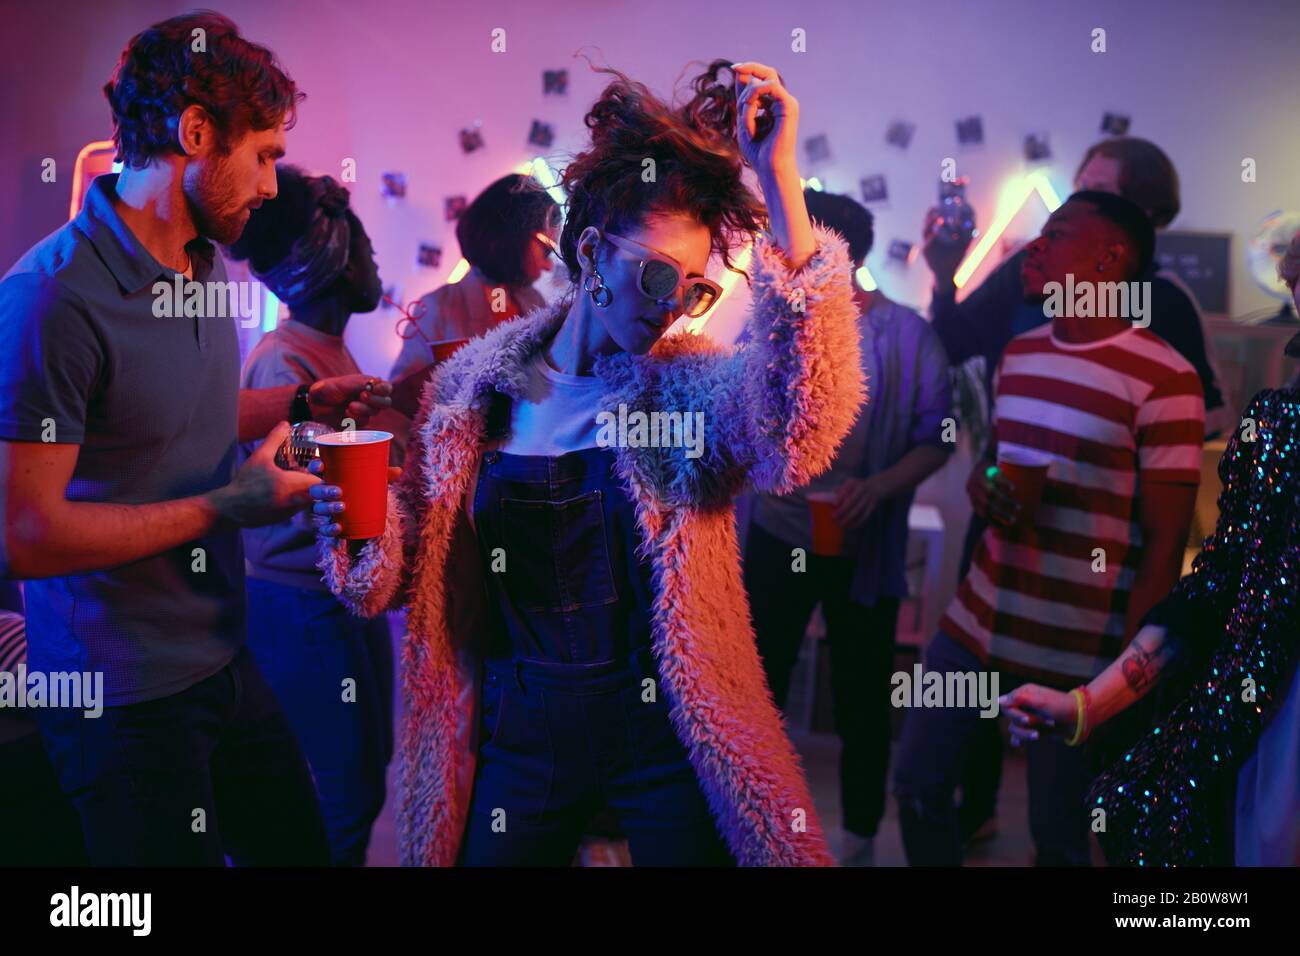 Young fashion woman with drink dancing among the young people at the party Stock Photo